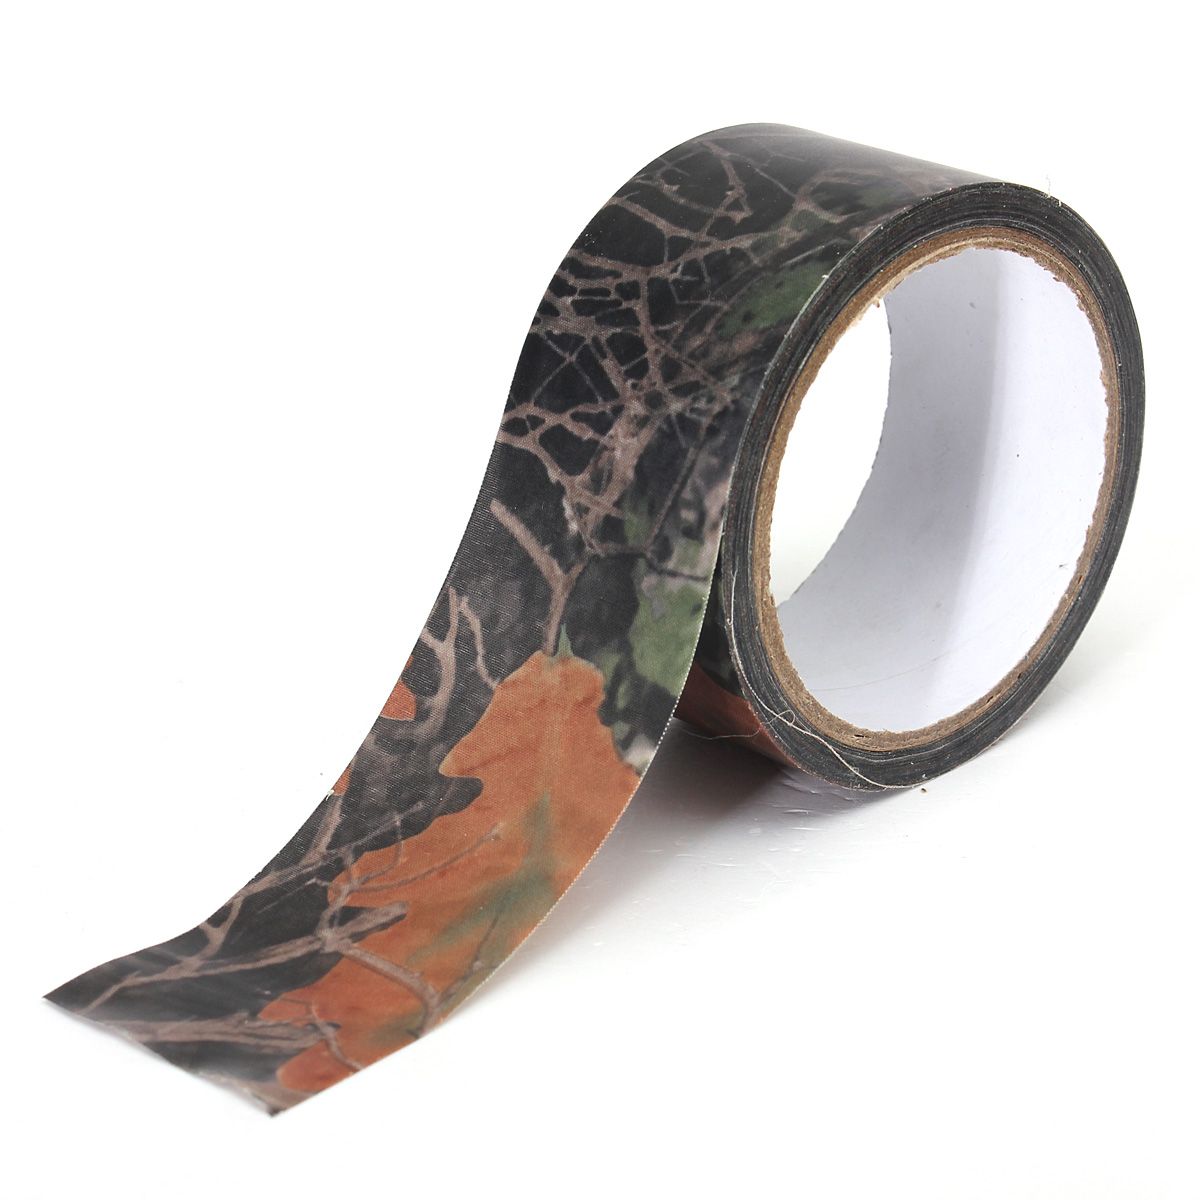 10M-Camouflage-Wrap-Tape-Camo-Tape-Duct-Waterproof-Mutifunctional-Fabric-Camping-Stealth-Tape-1310100